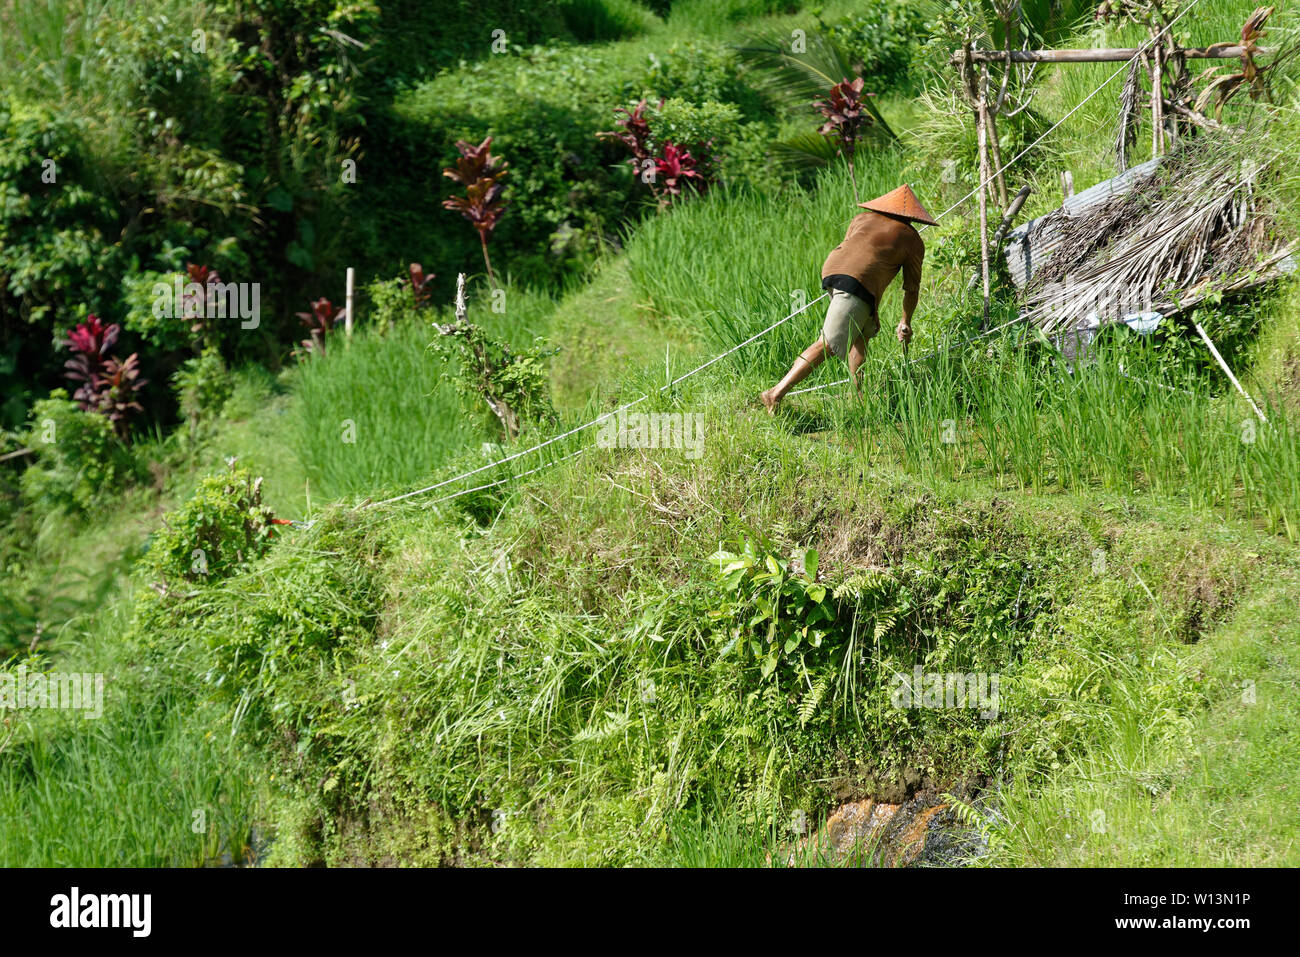 Man in conical hat maintaining the rice fields in Tegallalang, near Ubud, Bali, Indonesia Stock Photo